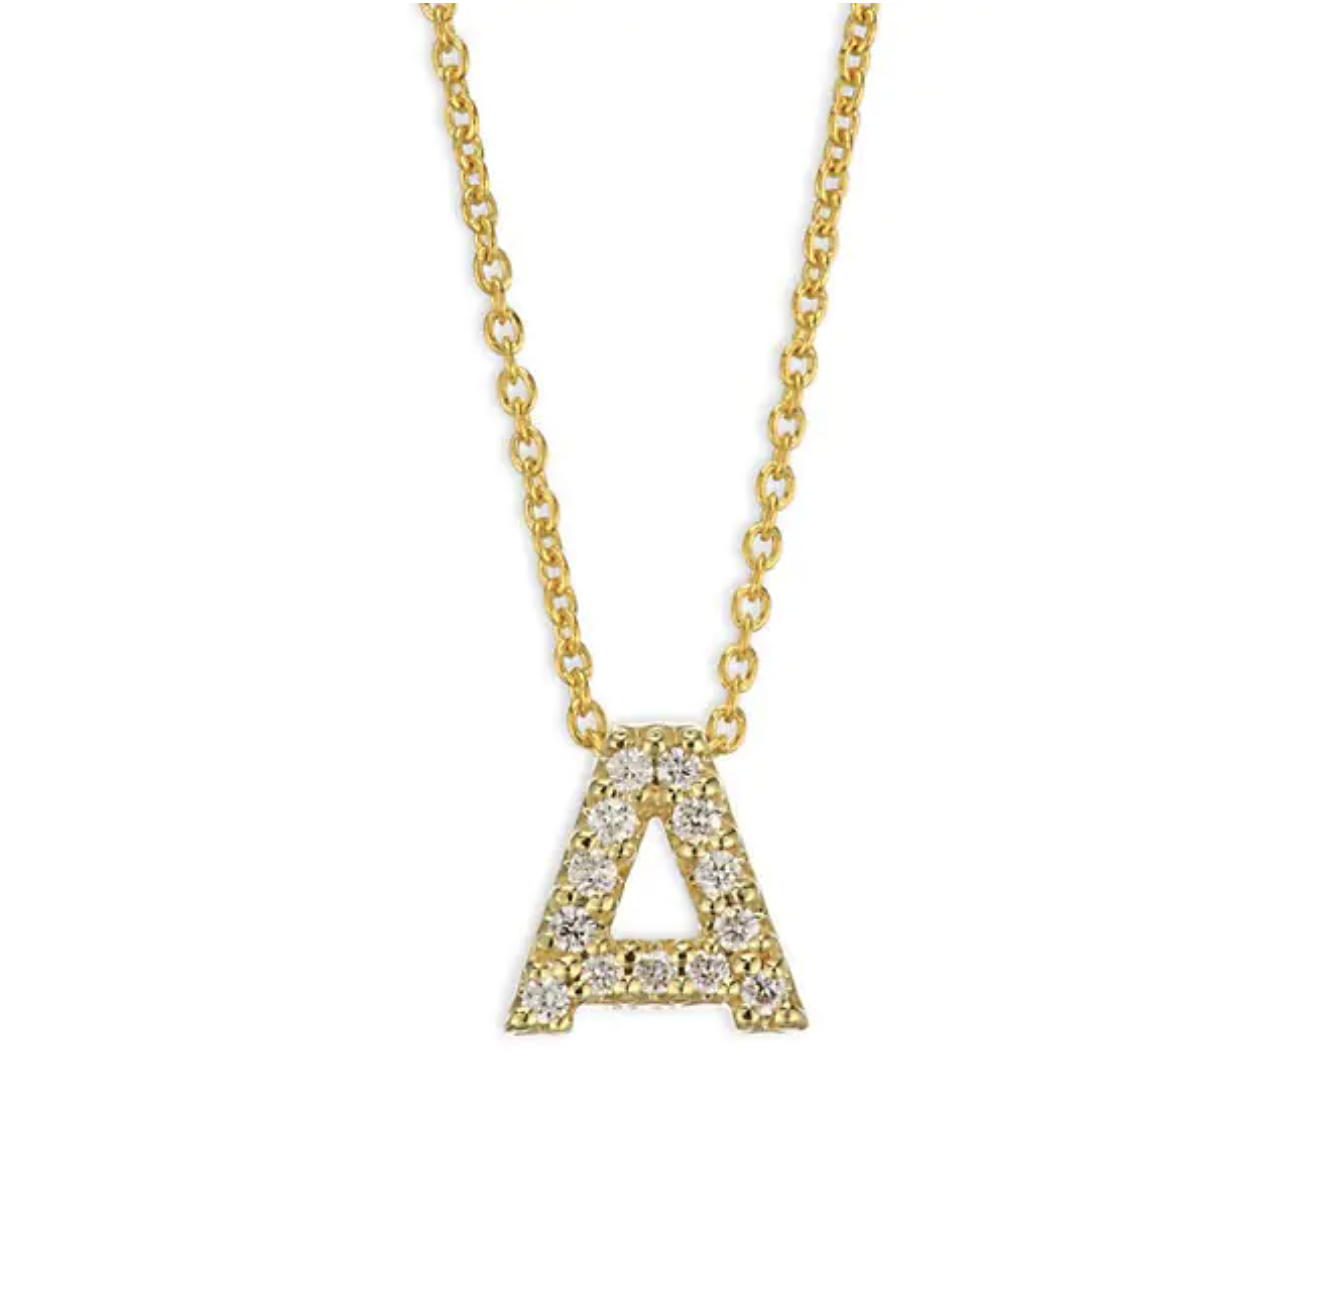 18K YG Love Letter 'A' Necklace with Diamonds